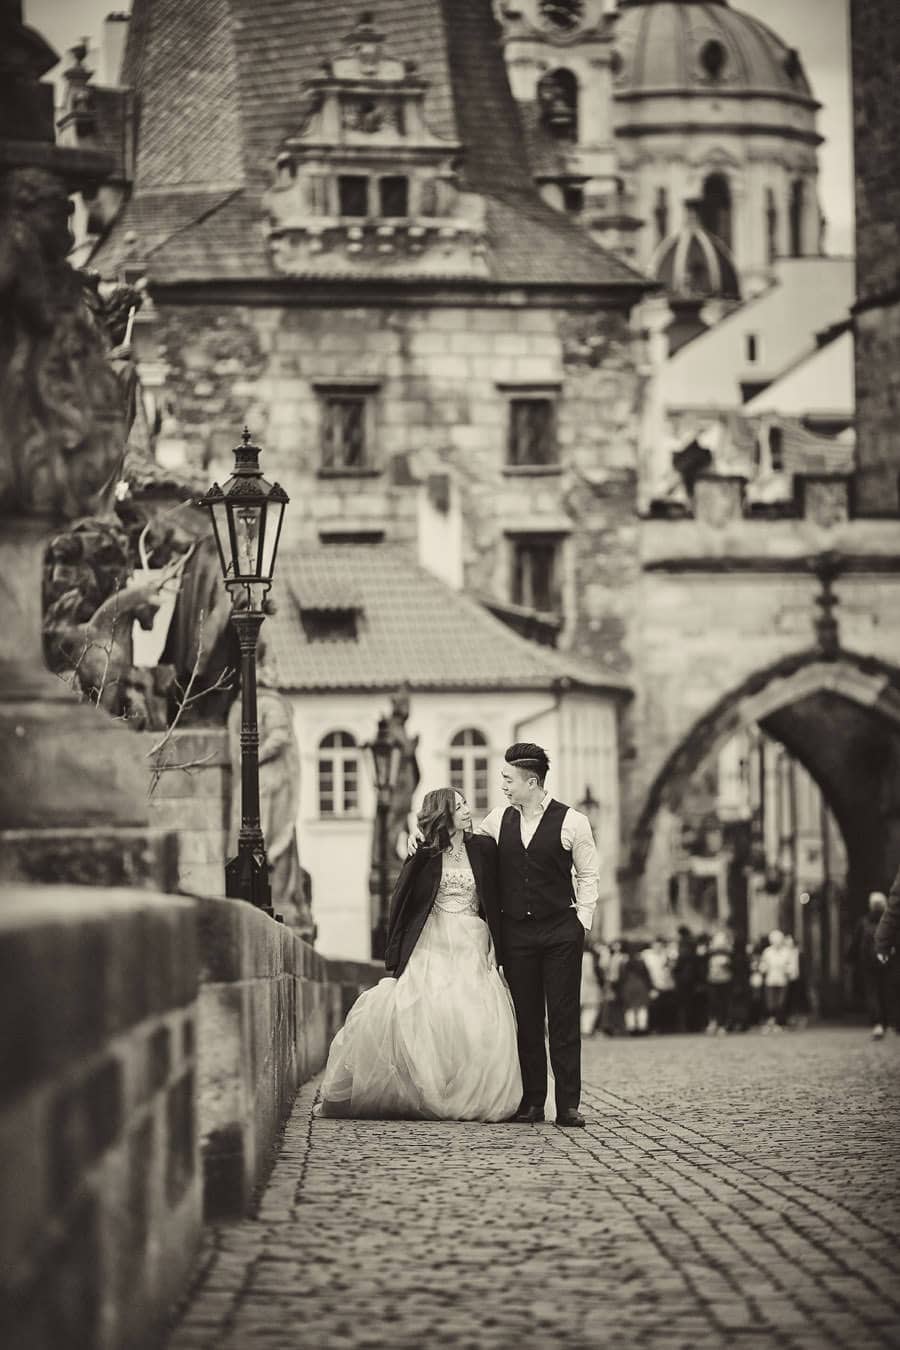 A B&W photo captured at the Charles Bridge in Prague - a Love Story Engagement photo shoot with Tina & Mike